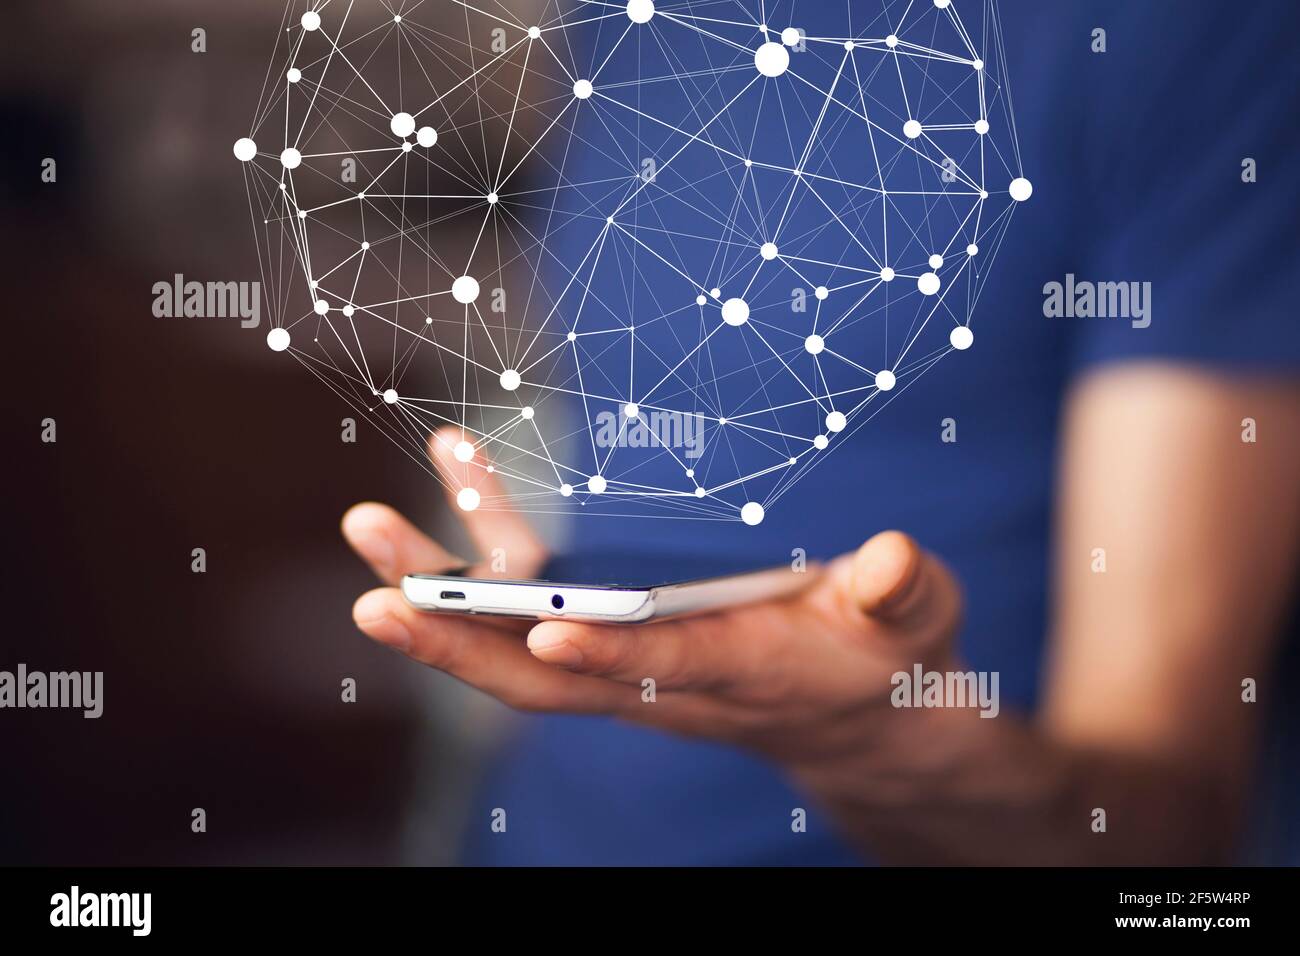 Businessman on blurred background using circle igital data network with mobile phone Stock Photo